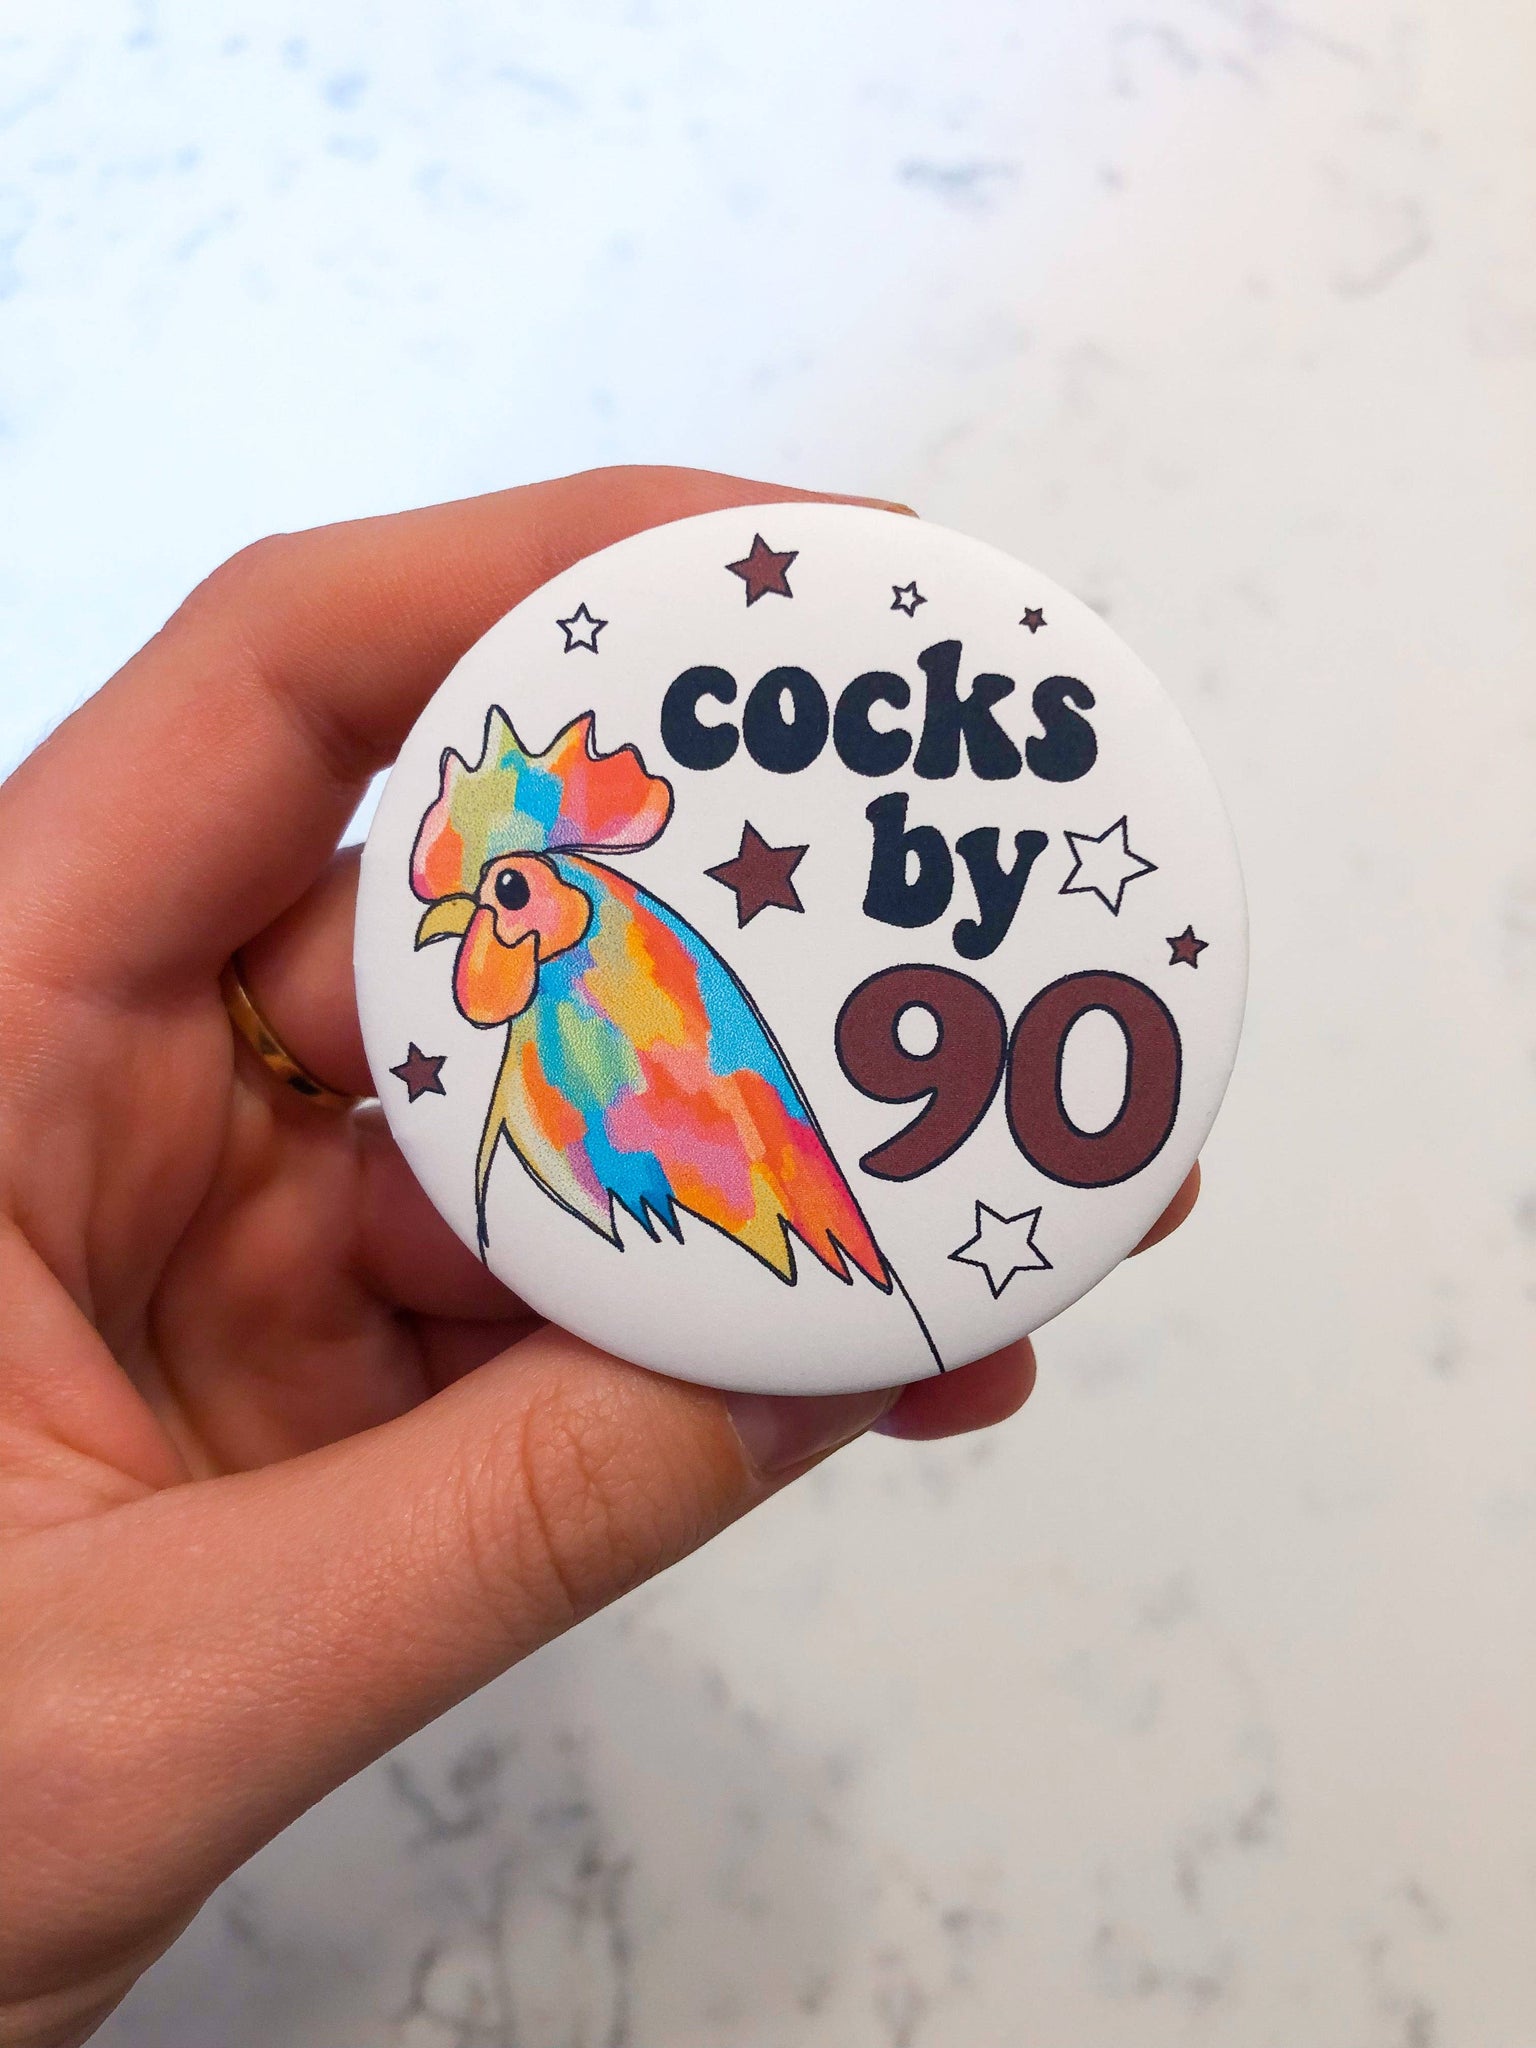 Cocks by 90 Button